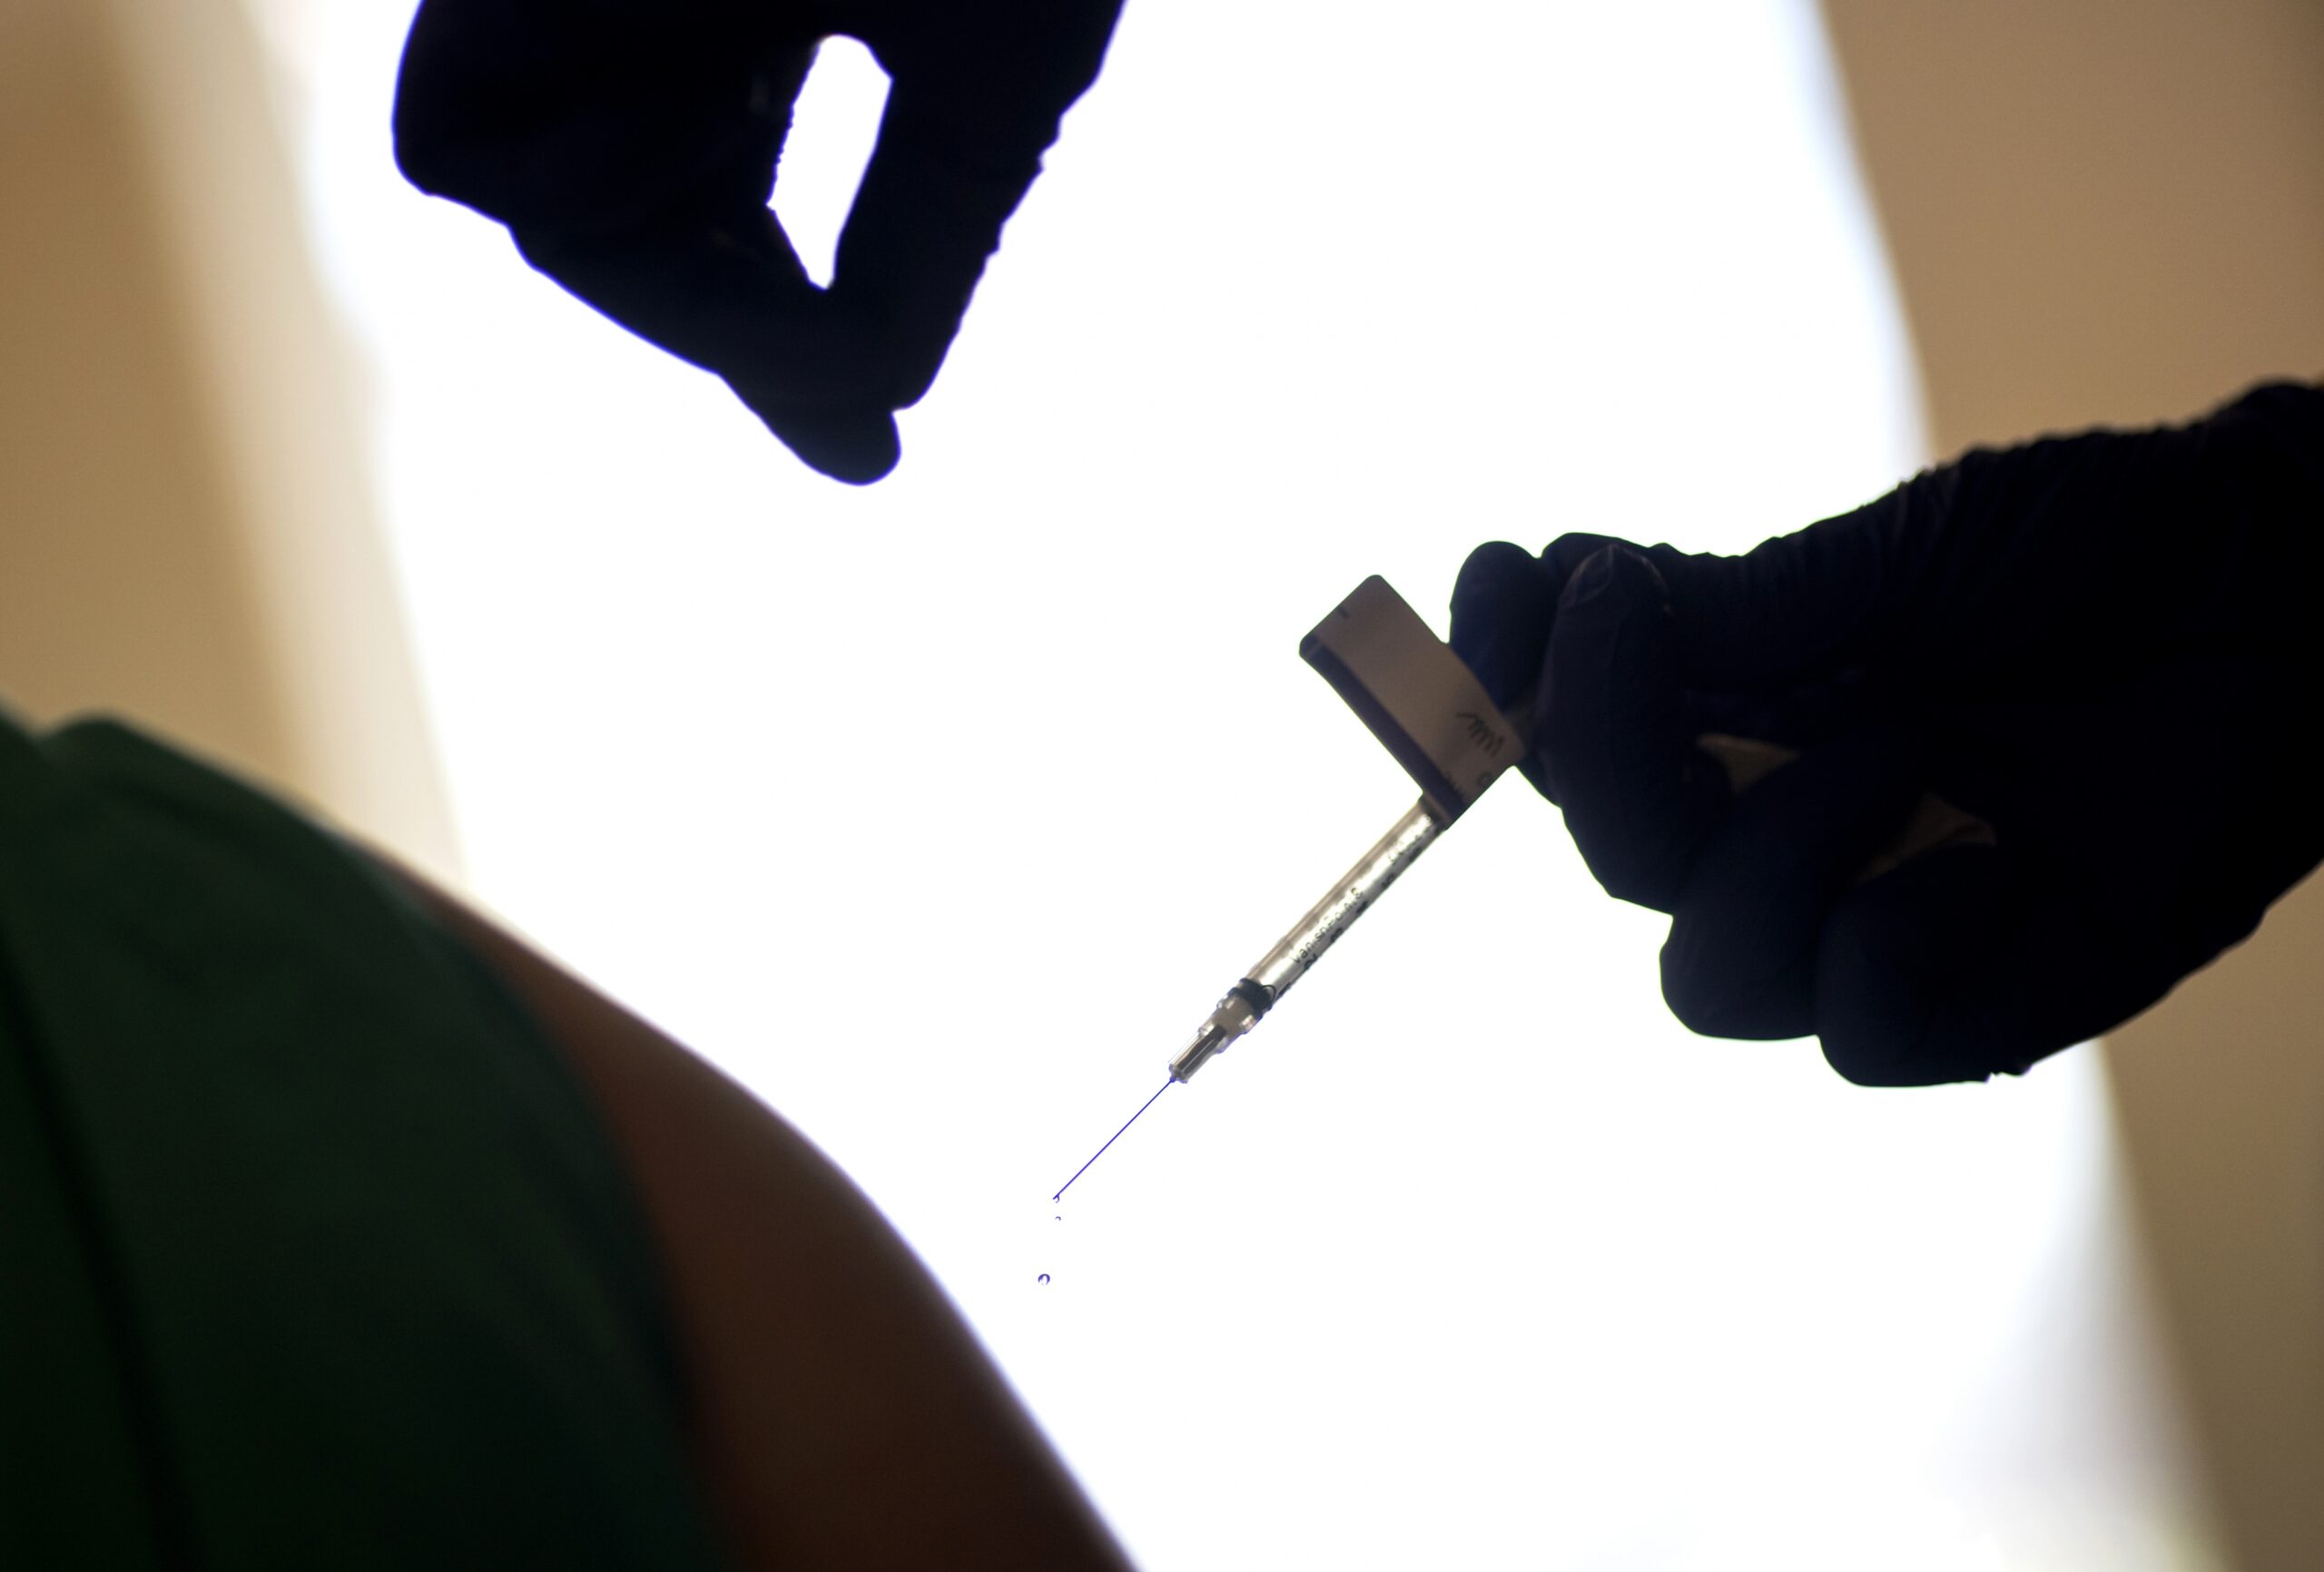 A droplet falls from a syringe after a health care worker was injected with the Pfizer-BioNTech COVID-19 vaccine